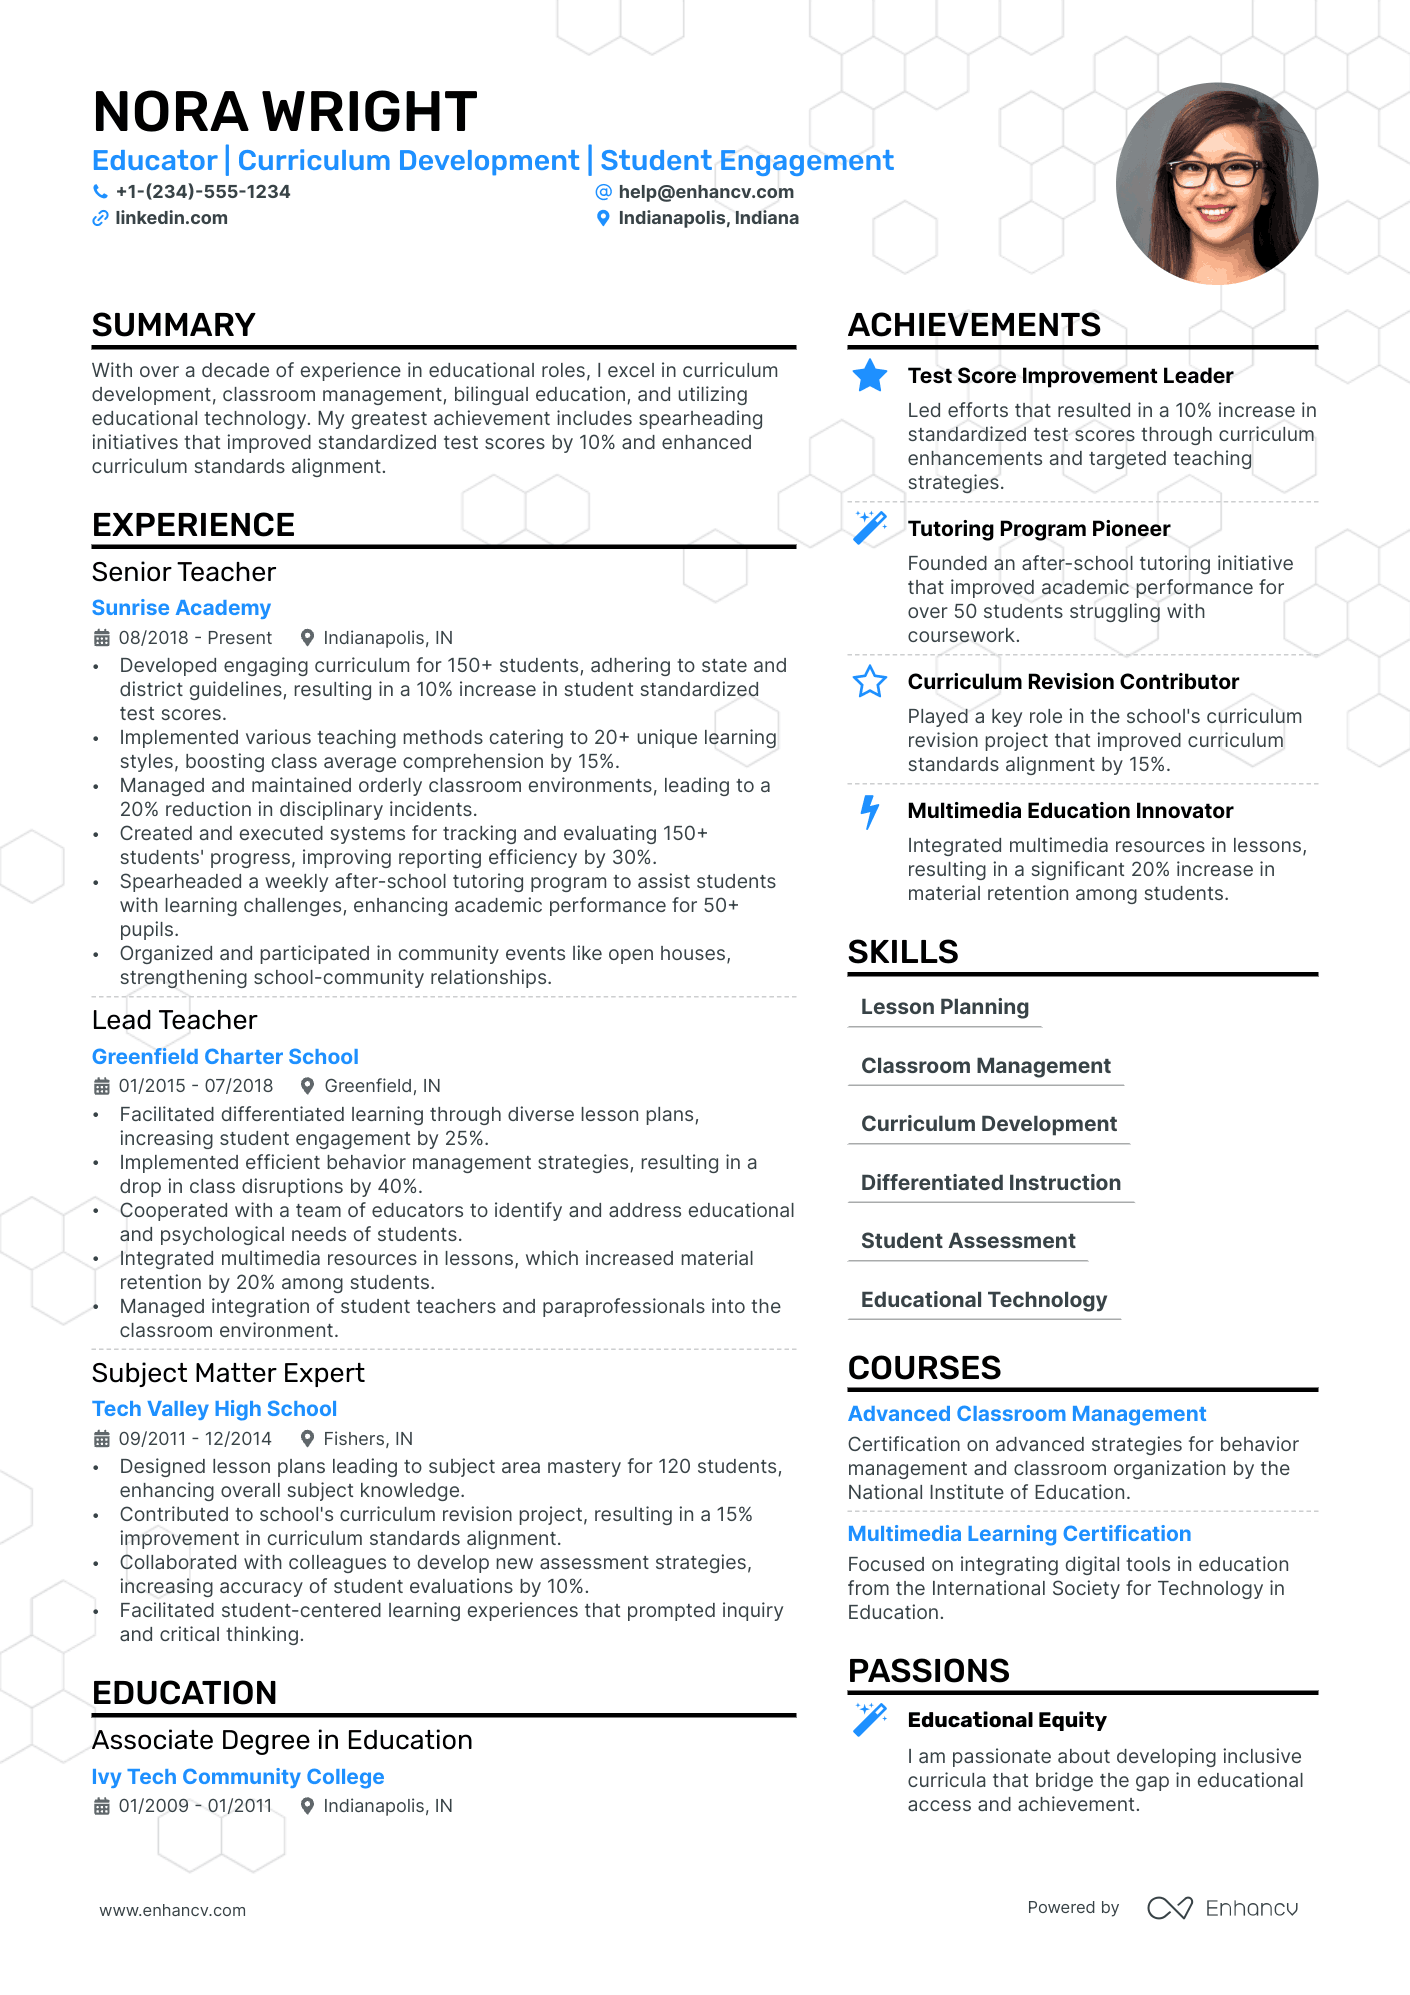 sample resume for teachers without experience pdf